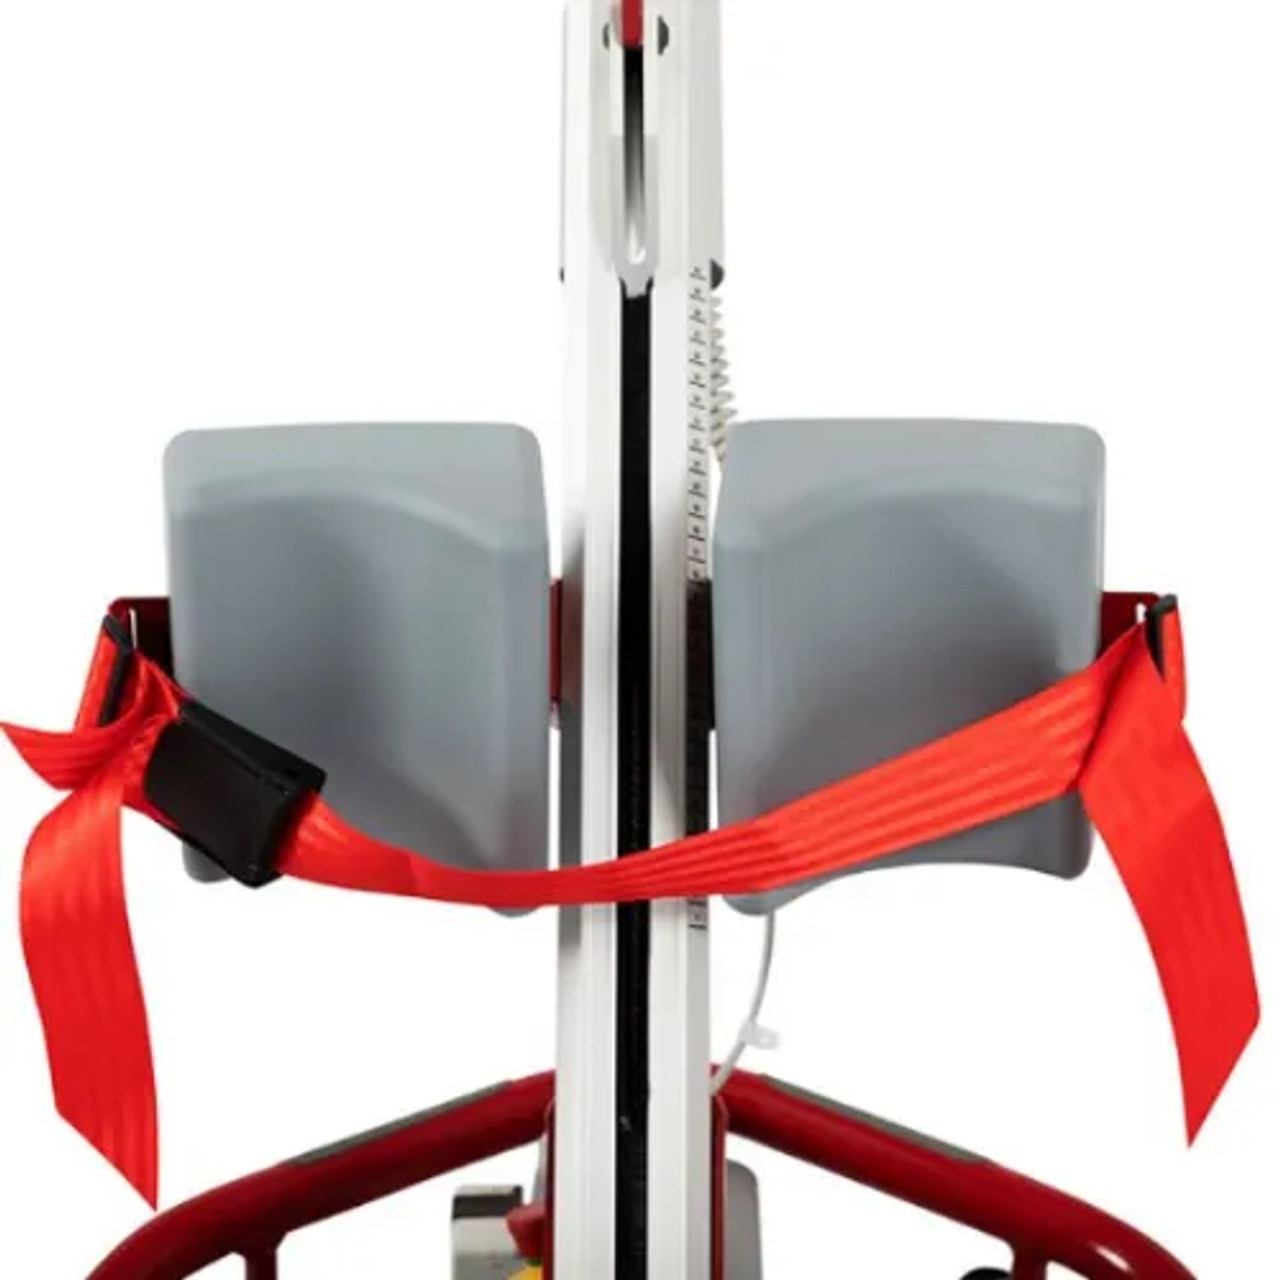 Molift Quick Raiser 1 Standing Patient Lift | Compact Design for Any Space-Chicken Pieces